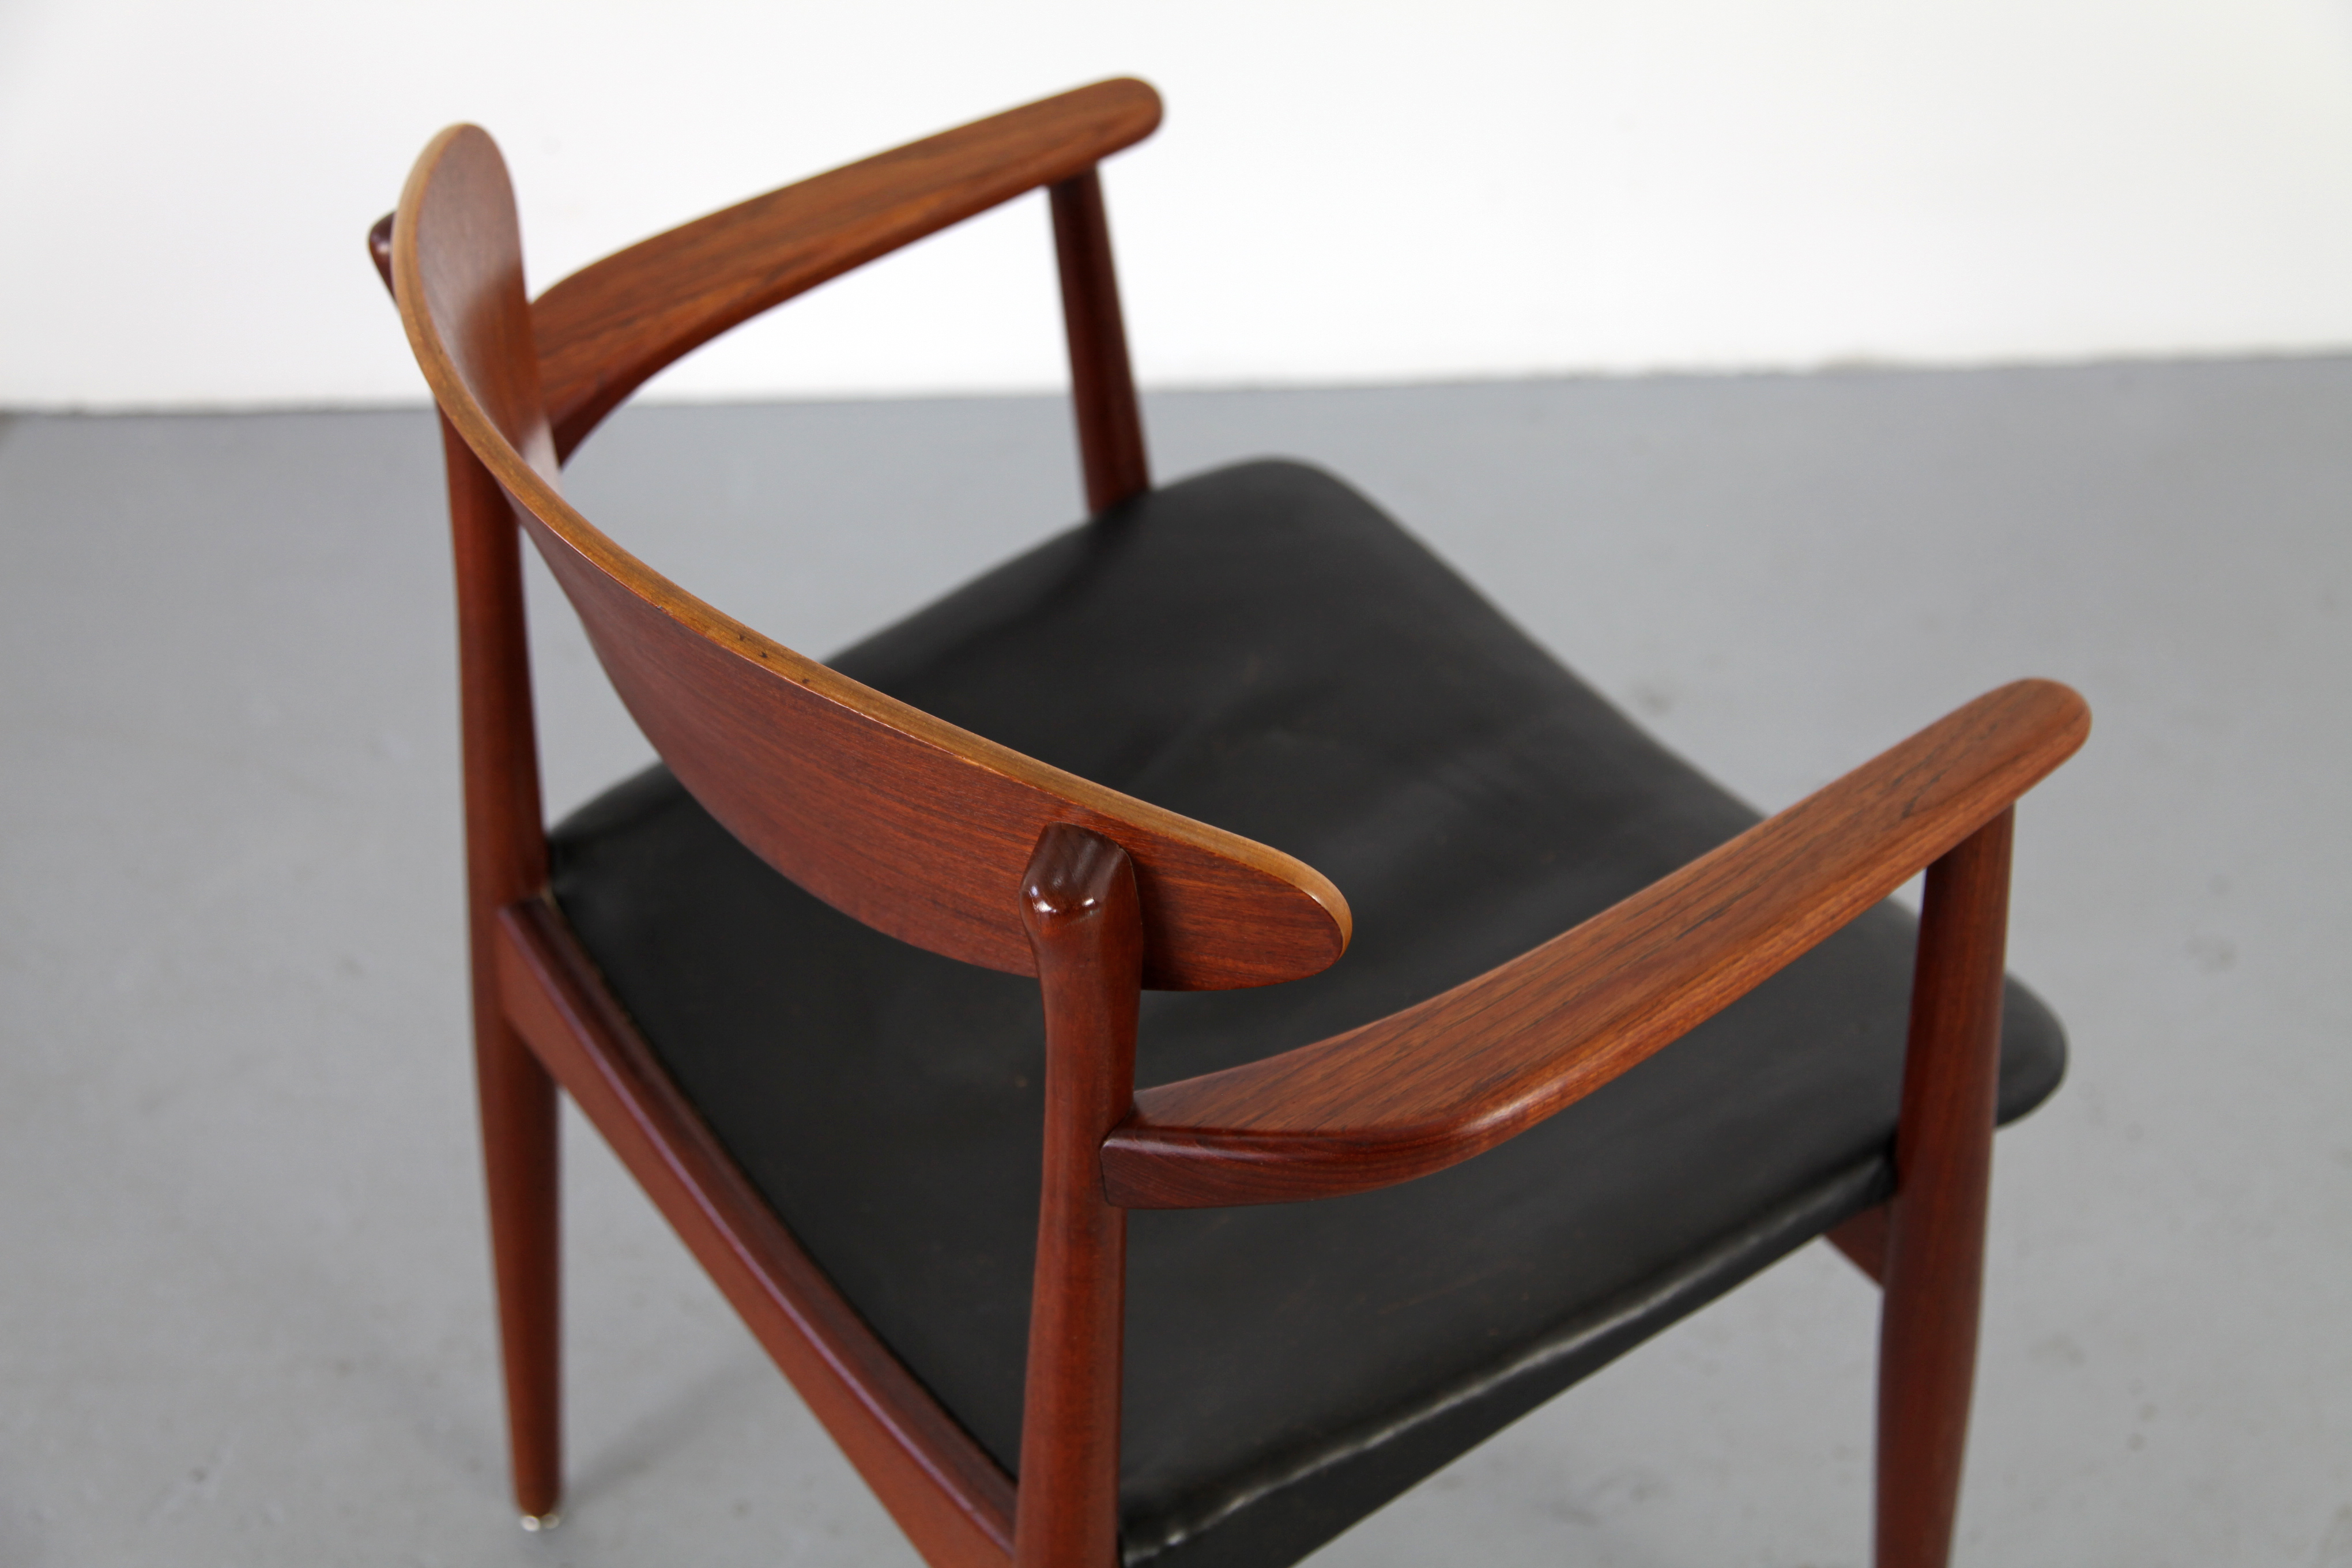 Teak and Leather Arm Chair / Armlehnstuhl mod 1656 by M. A. A. Ejner Larsen and A. Bender Madsen for Naesved Møbelfabrik - Made in Denmark_6